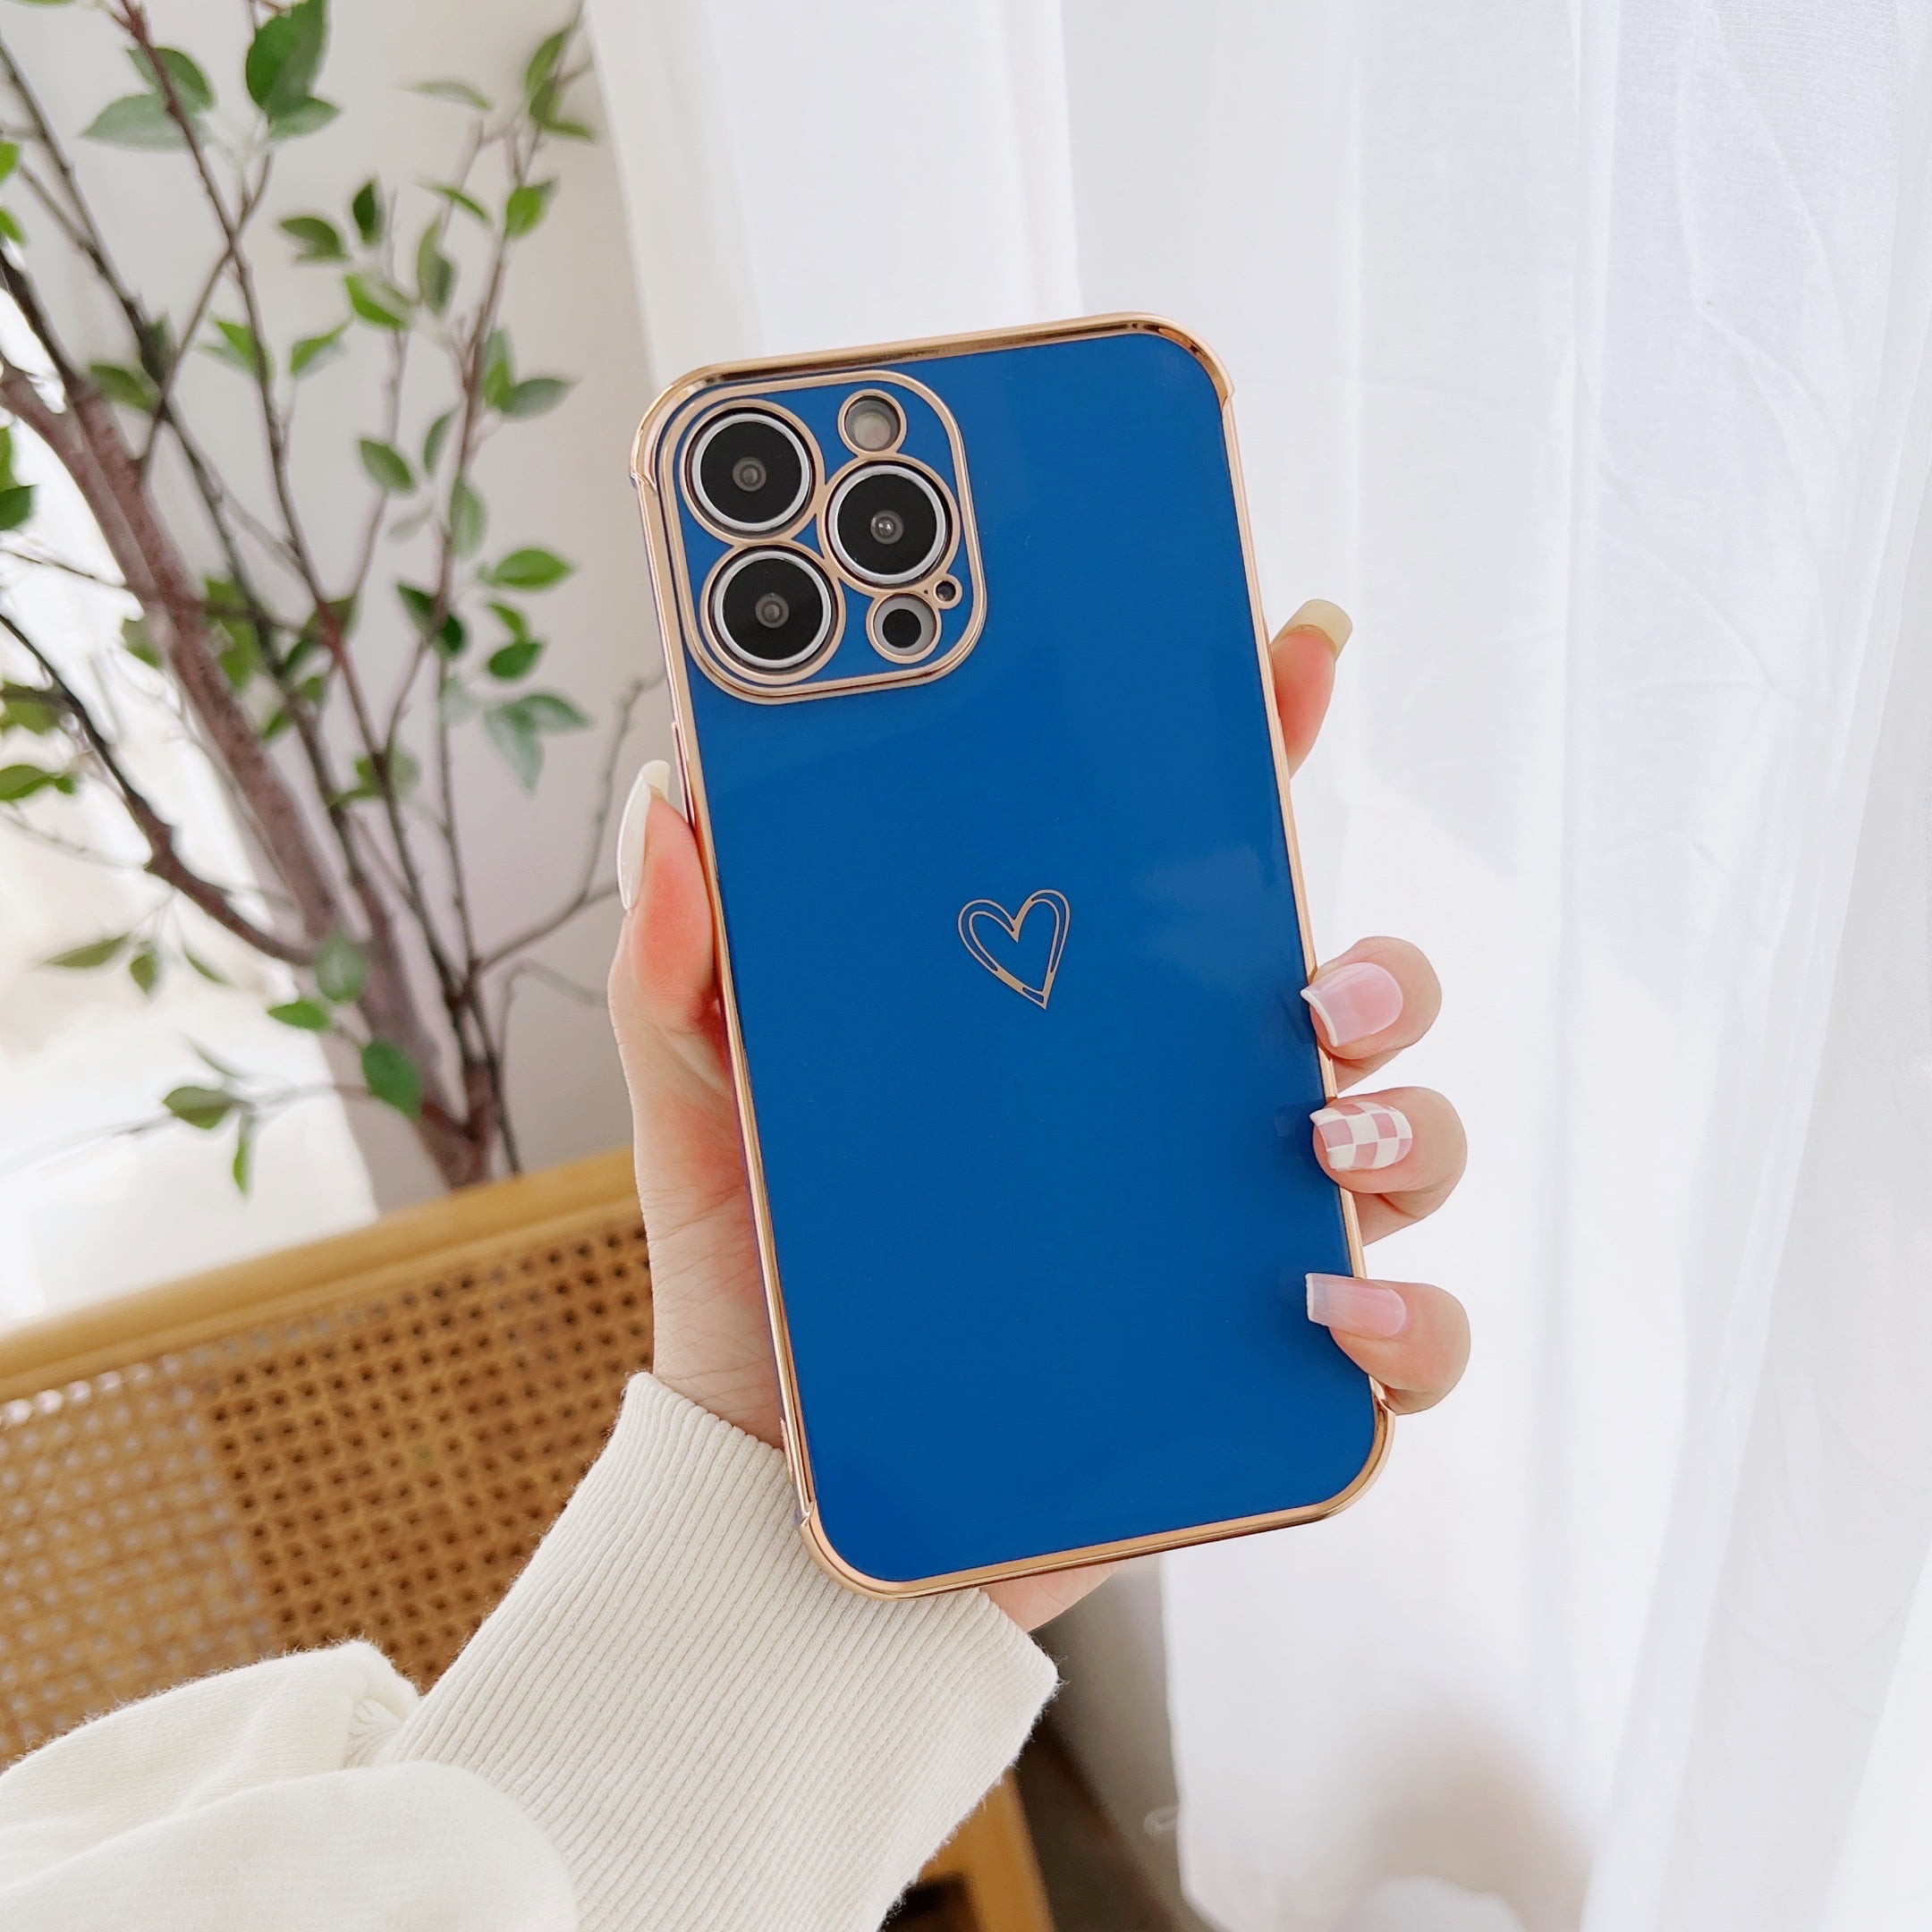 Iphone 11 Pro Max Case That Covers Camera Italy, SAVE 35% 